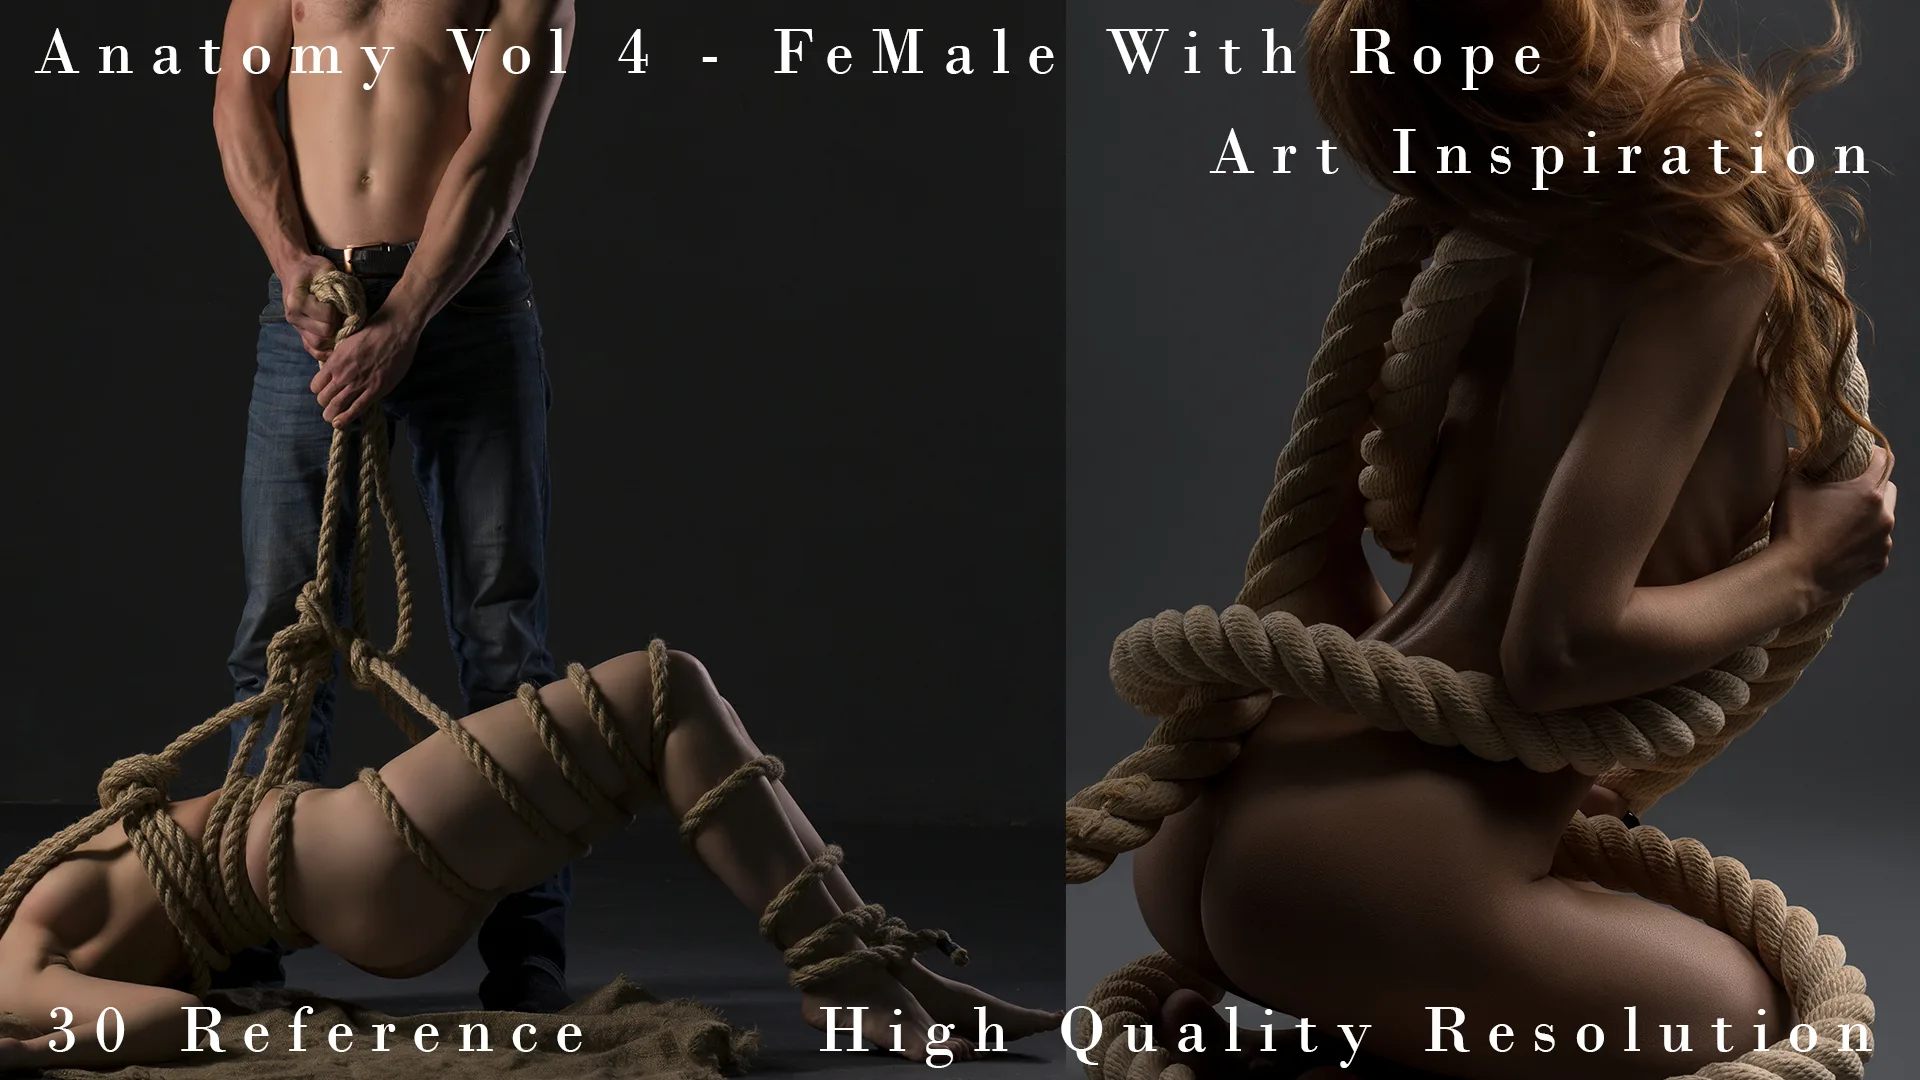 Anatomy Vol 4 - FeMale With Rope - Art Inspiration